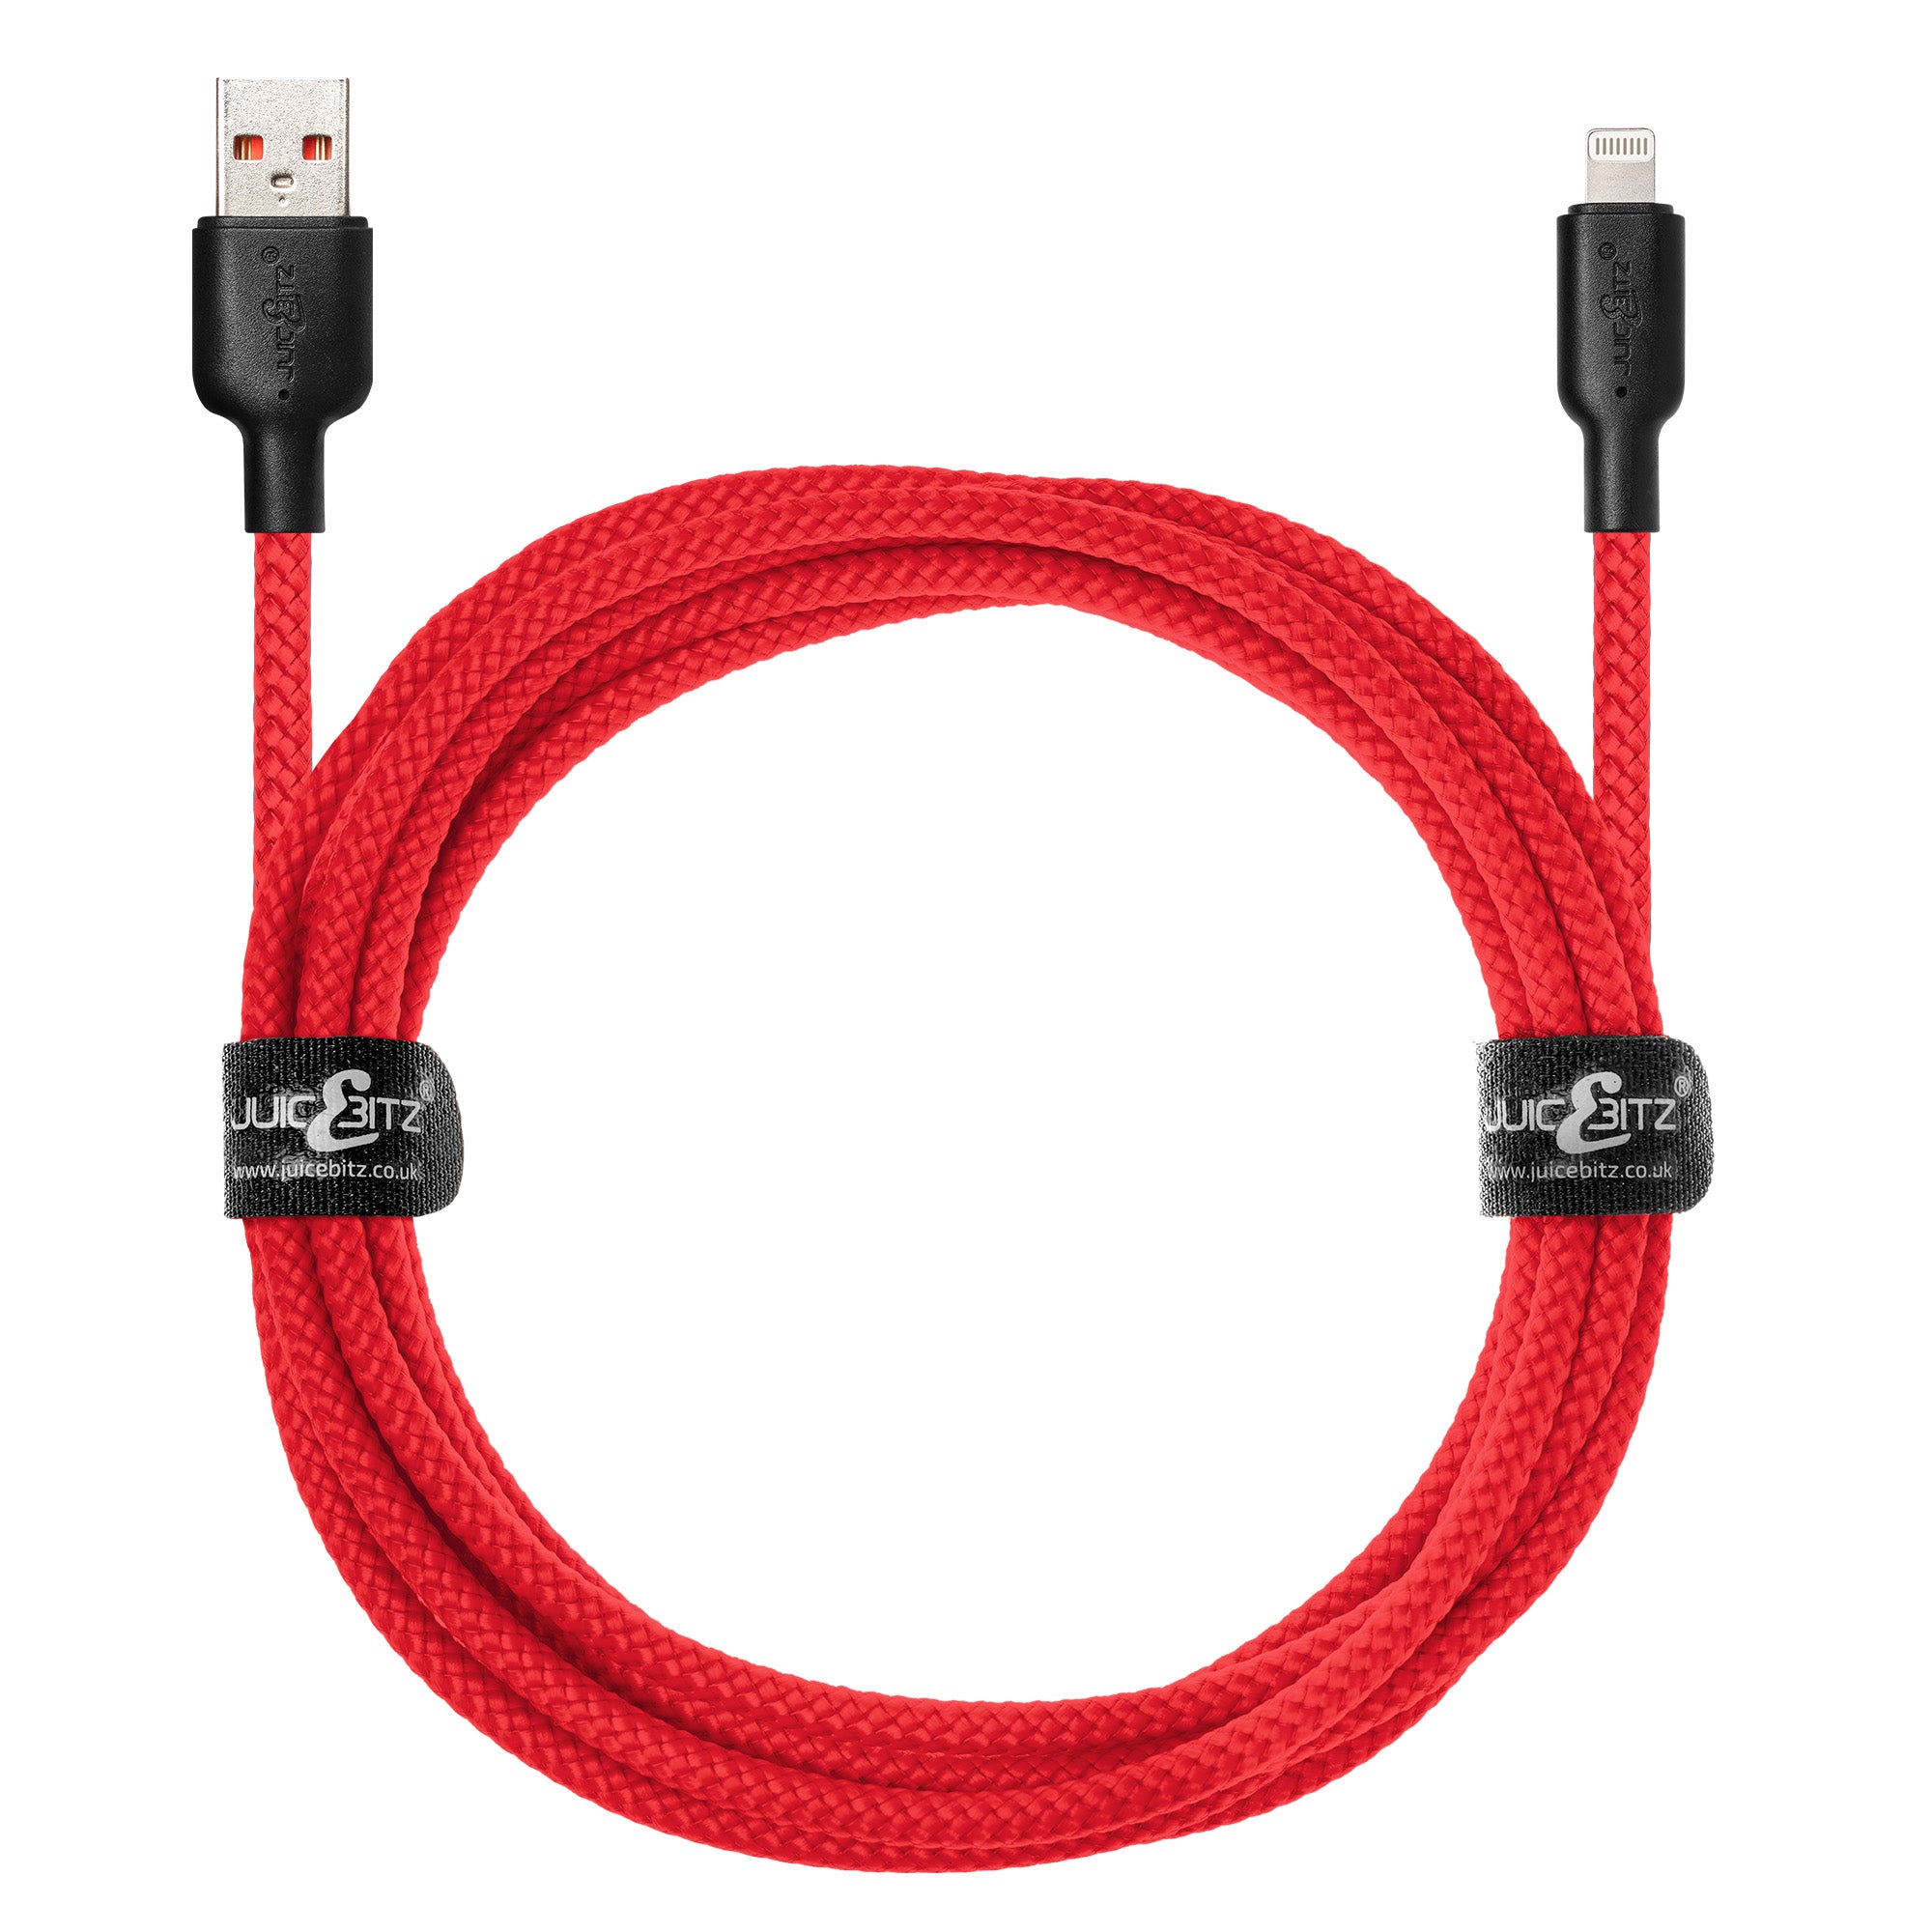 Braided Heavy Duty USB Charger Cable Data Sync Wire Lead for iPhone, iPad, iPod - Red